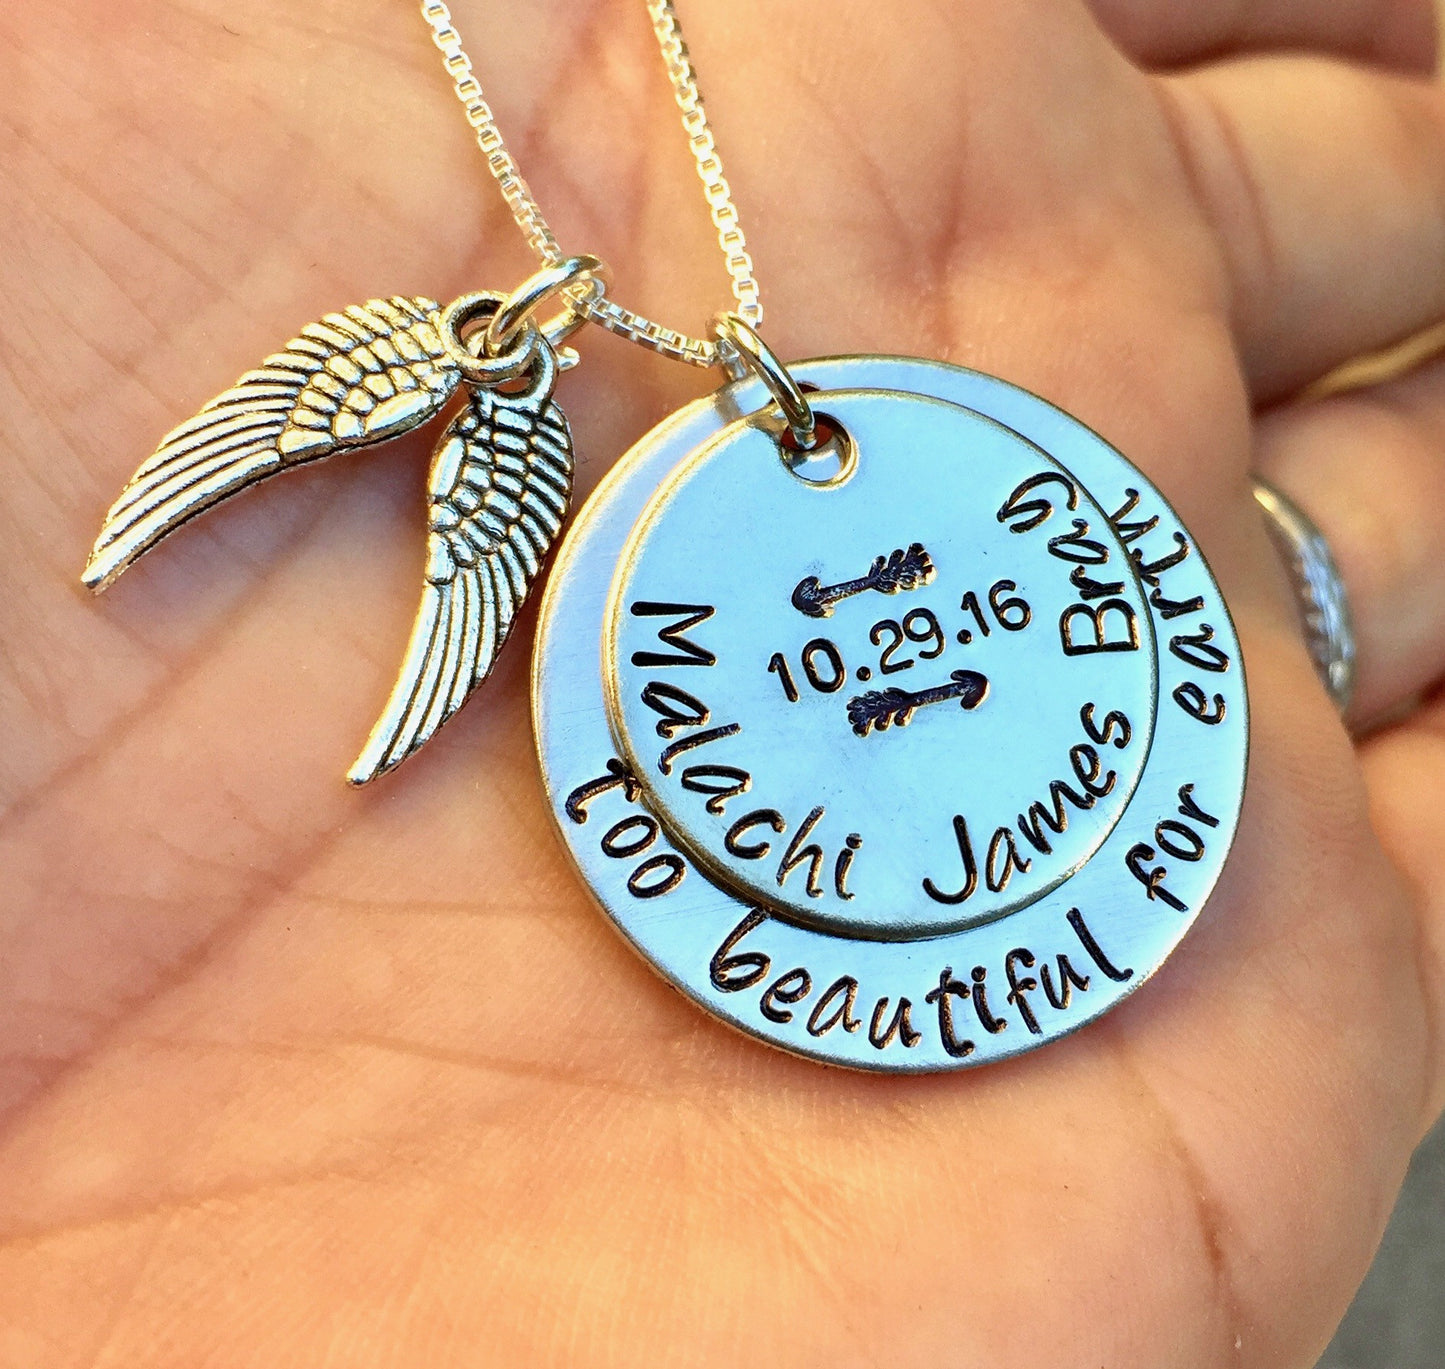 Too Beautiful For Earth Necklace, Memorial Necklace, Personalized Necklace, Natashaaloha - Natashaaloha, jewelry, bracelets, necklace, keychains, fishing lures, gifts for men, charms, personalized, 